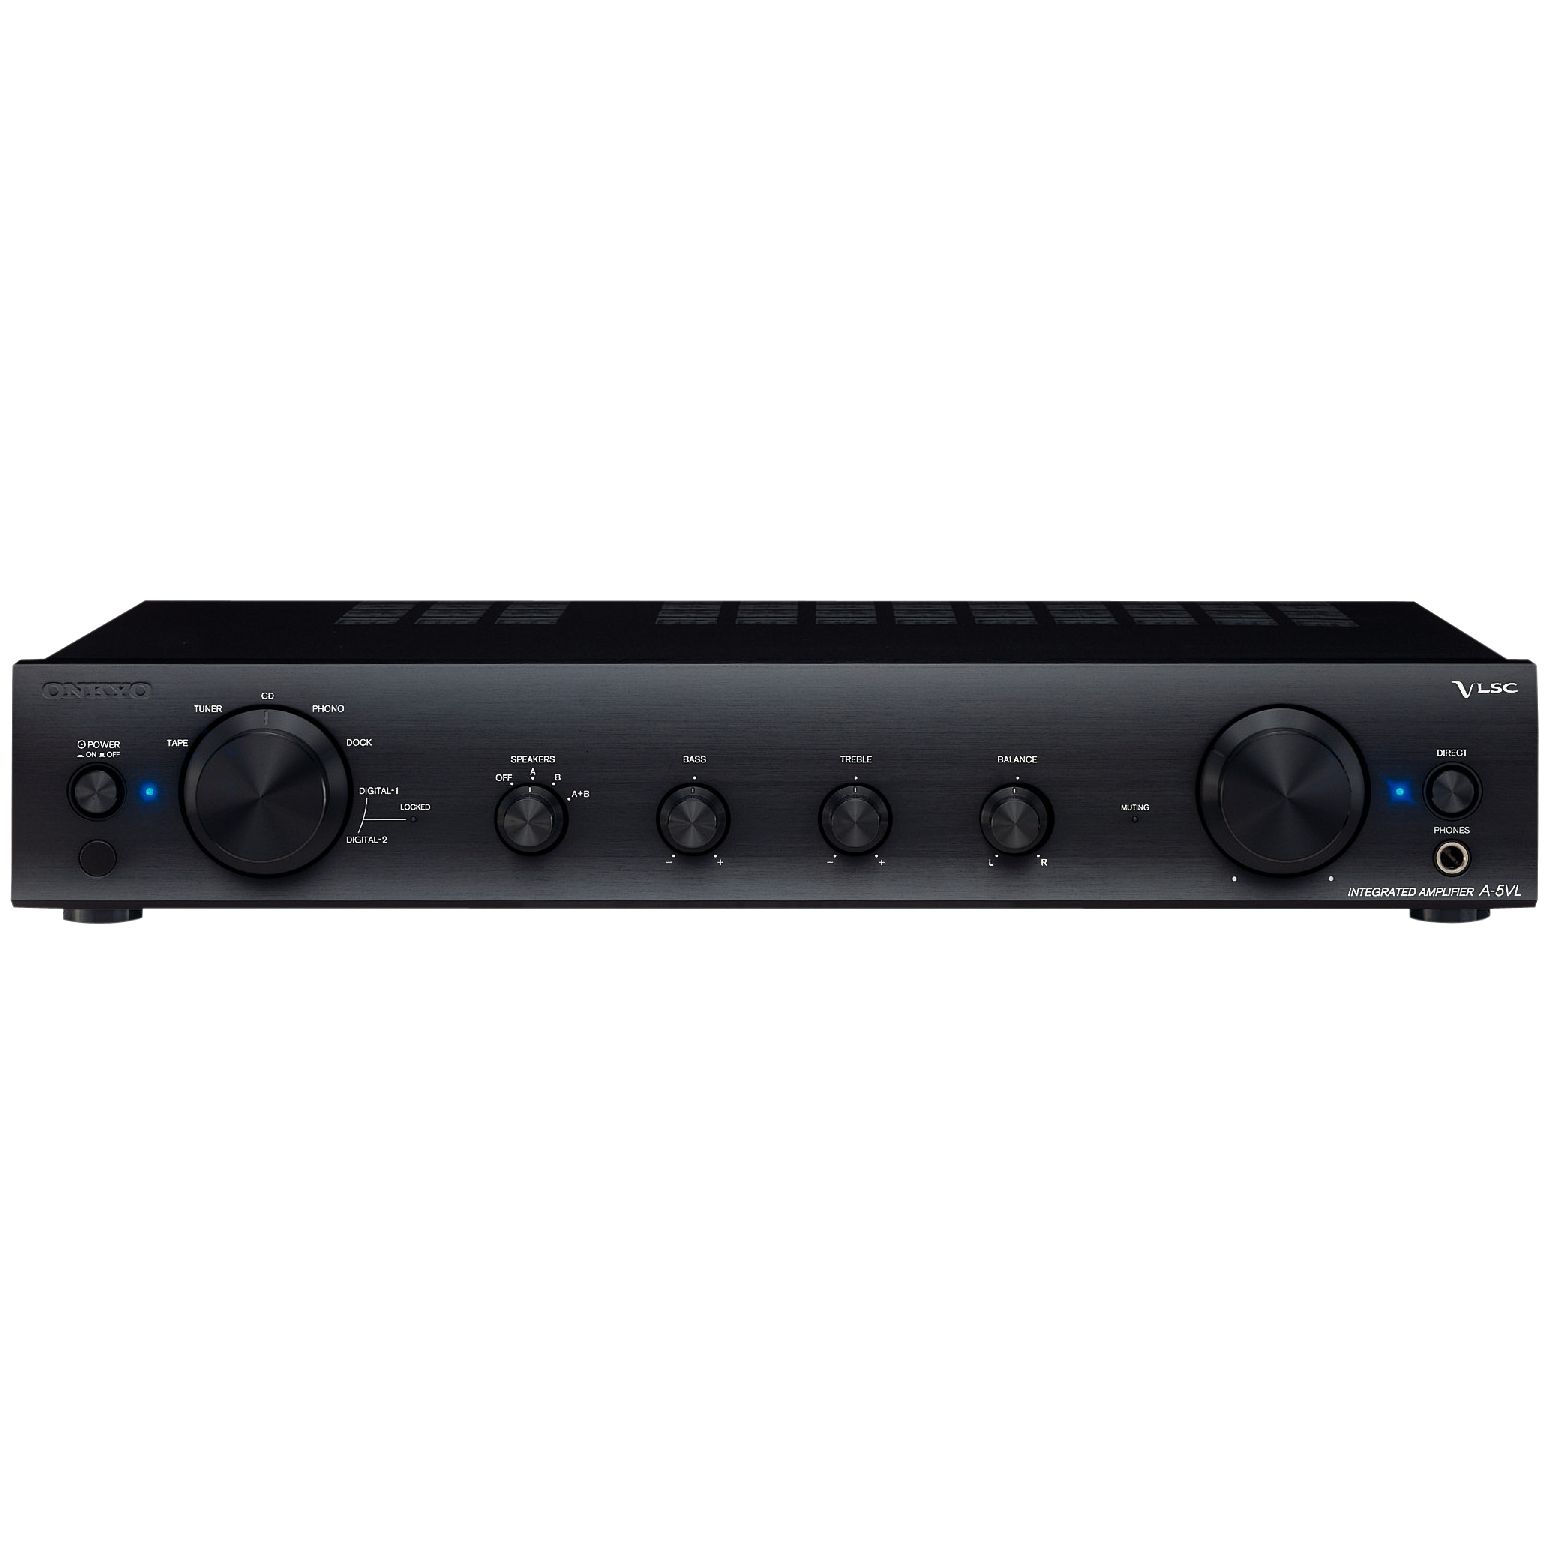 Onkyo A-5VLB Integrated Stereo Amplifier, Black at John Lewis